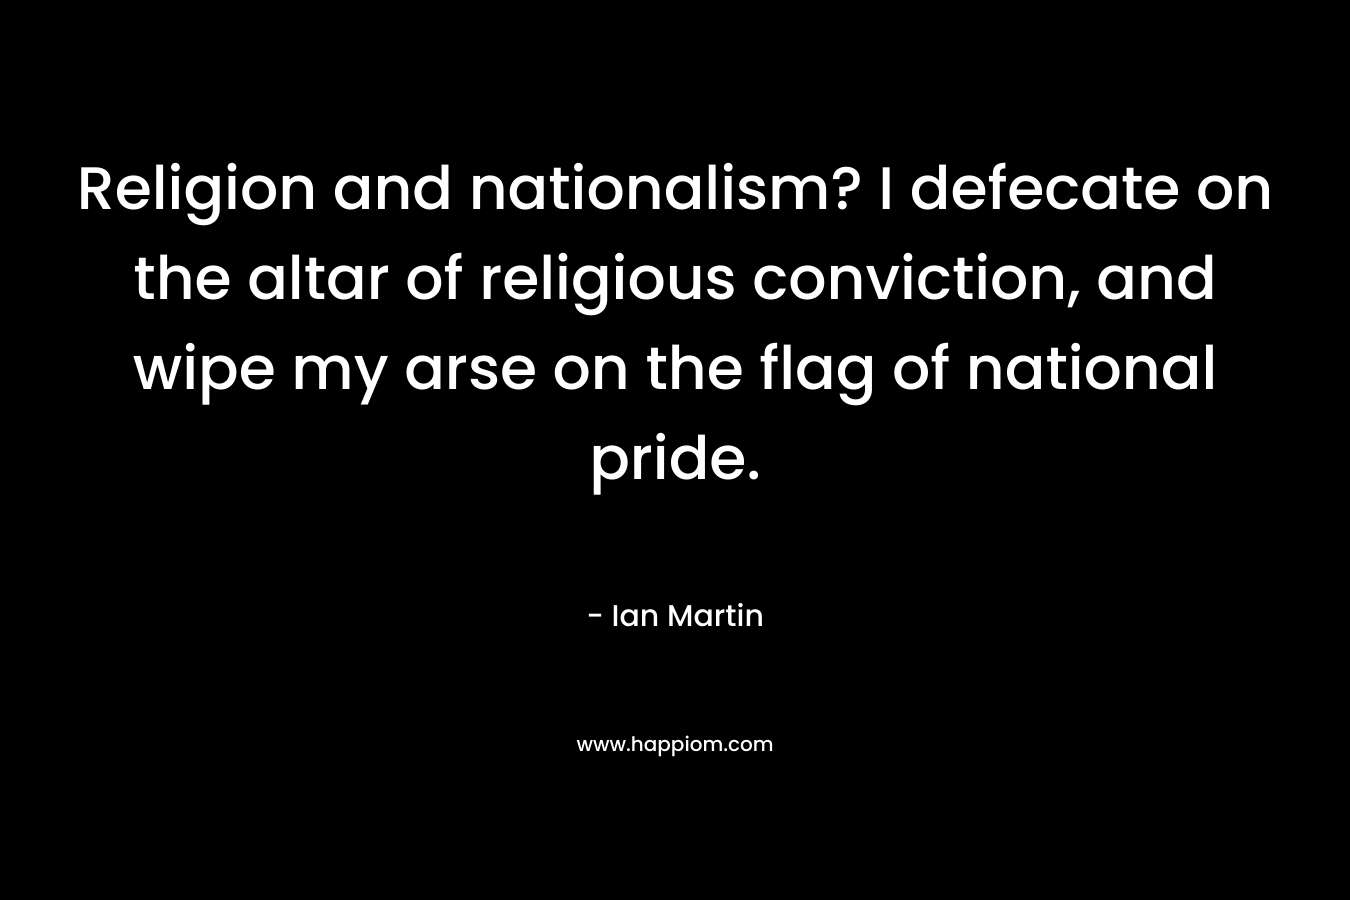 Religion and nationalism? I defecate on the altar of religious conviction, and wipe my arse on the flag of national pride. – Ian Martin